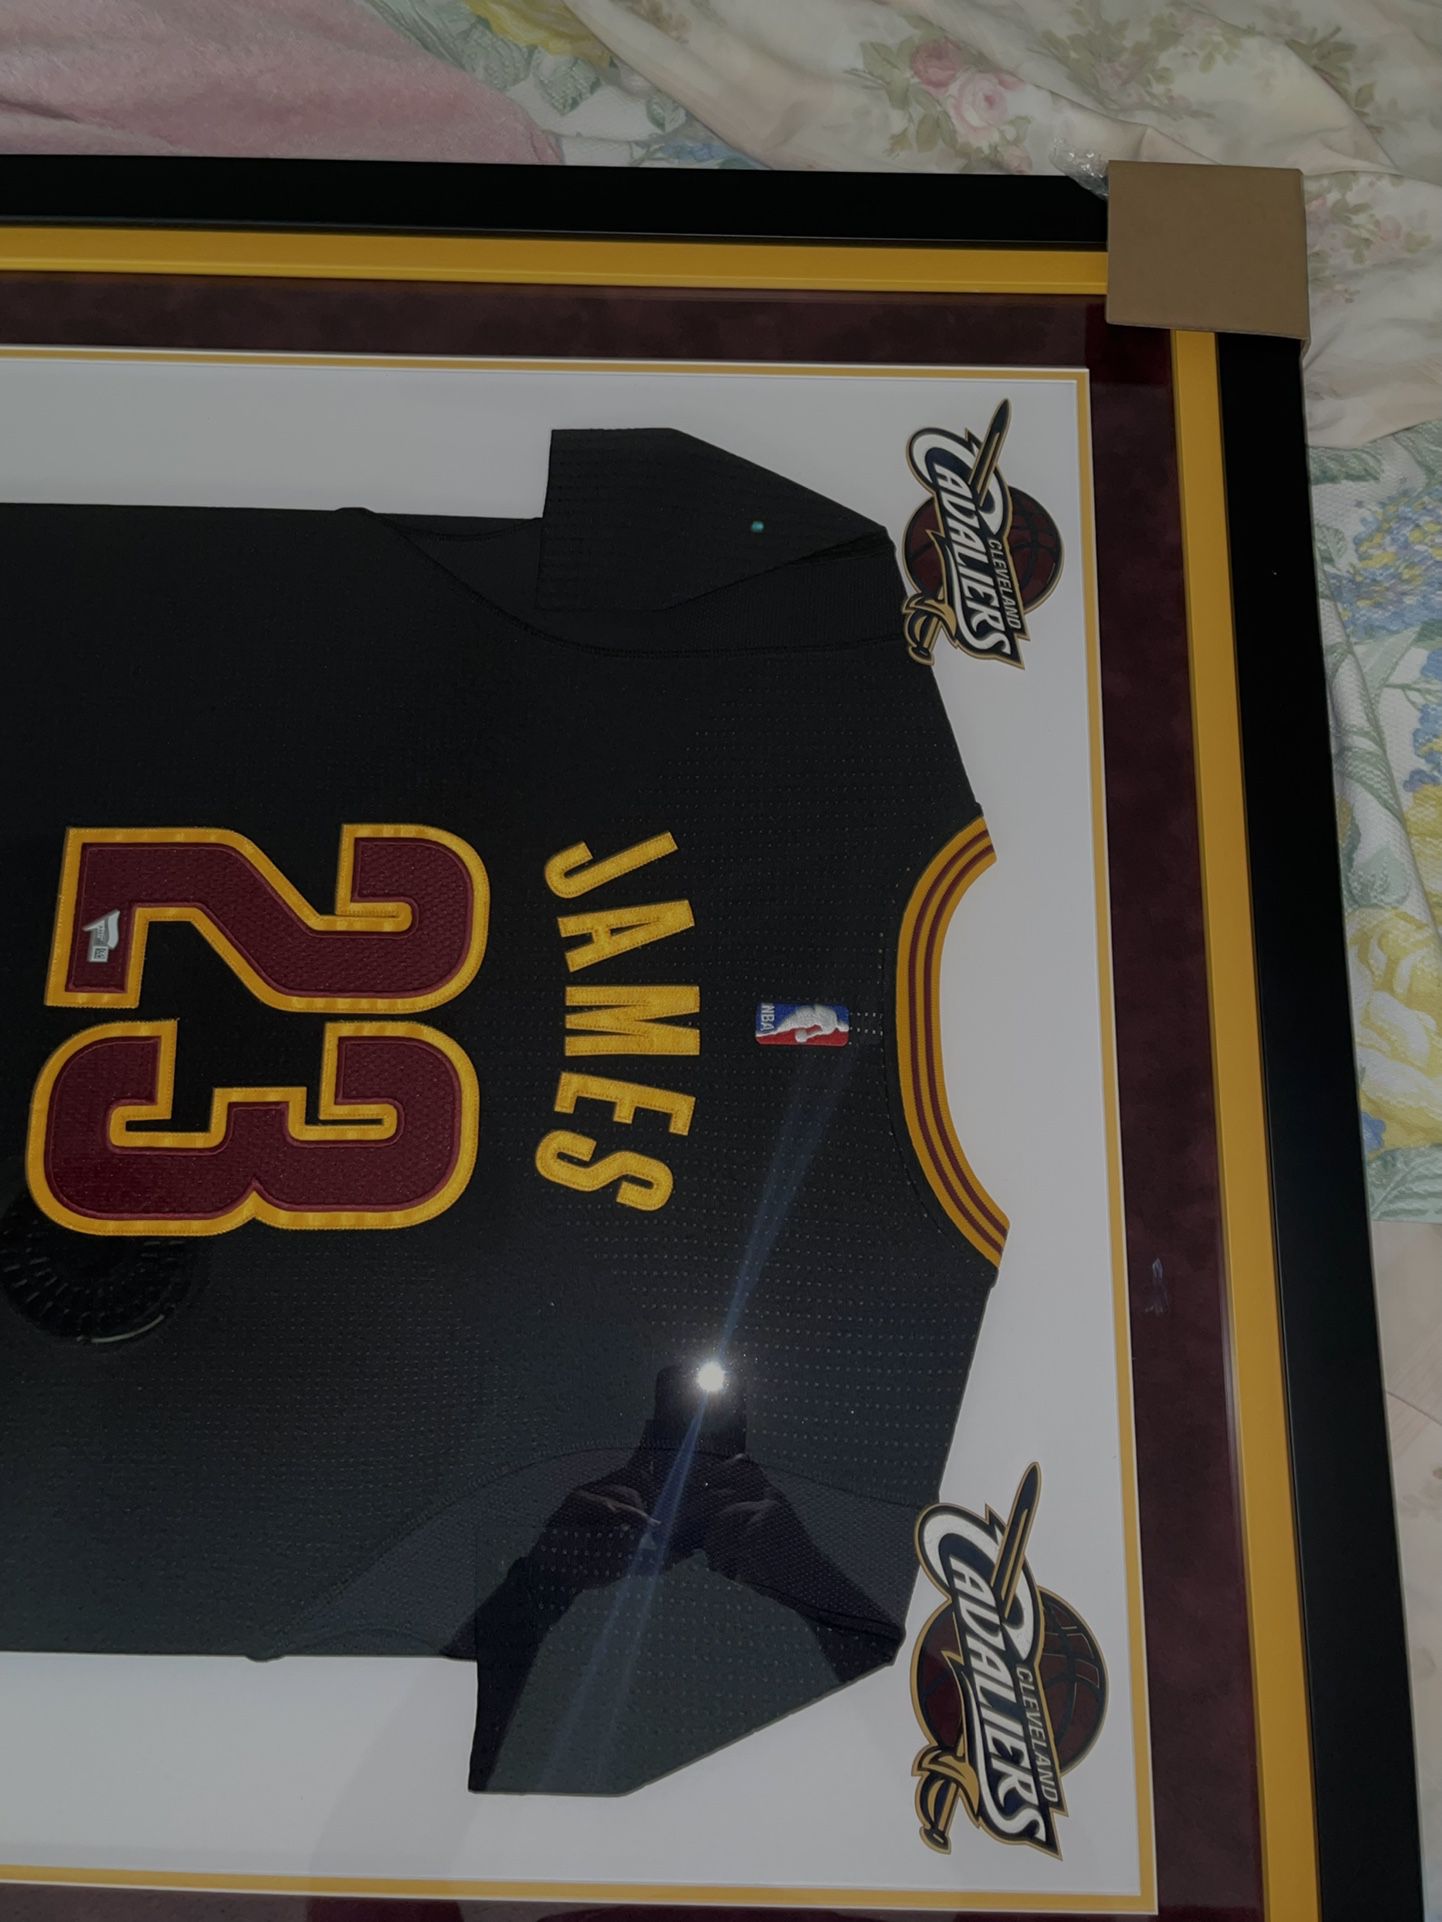 LeBron James Signed, Framed Jersey With Certificate Of Authenticity for  Sale in San Diego, CA - OfferUp